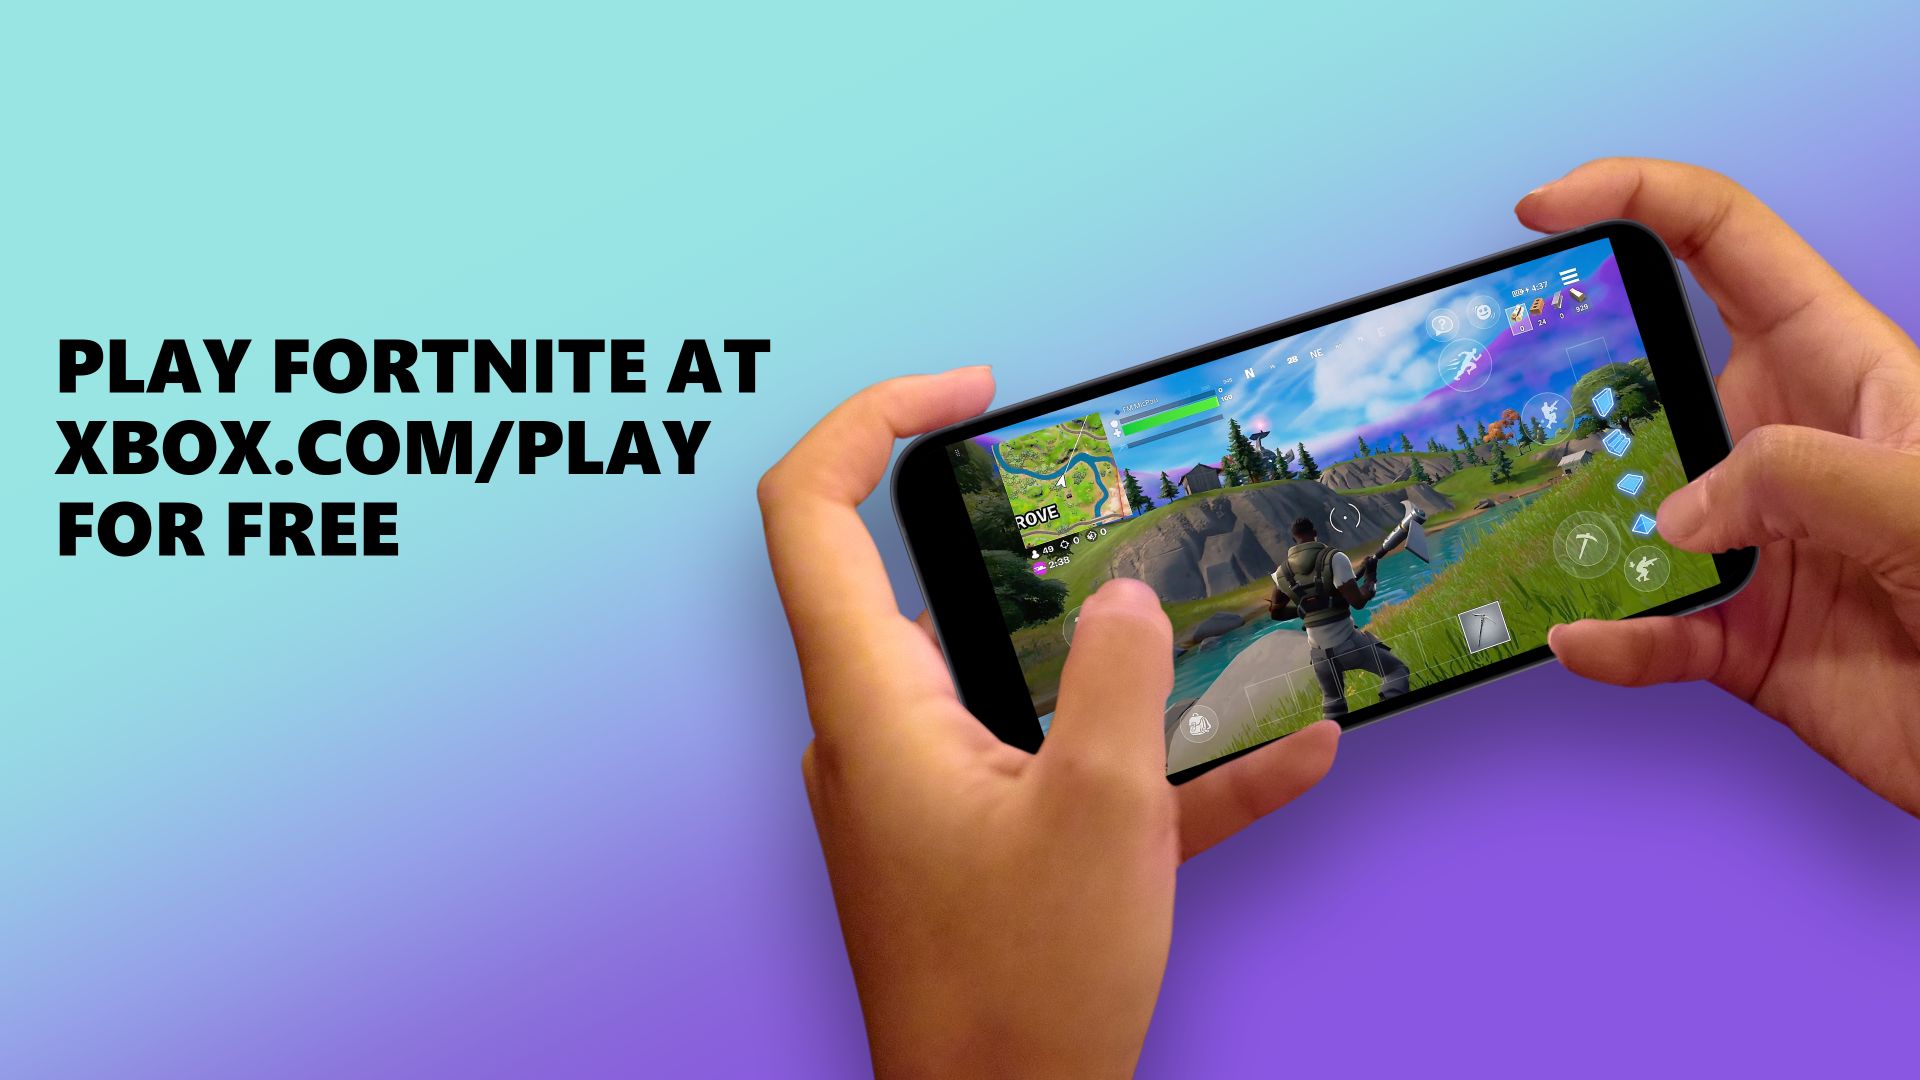 Play Fortnite on iOS, iPadOS, Android Phones and Tablets, and Windows PC with Xbox Cloud Gaming for Free 2